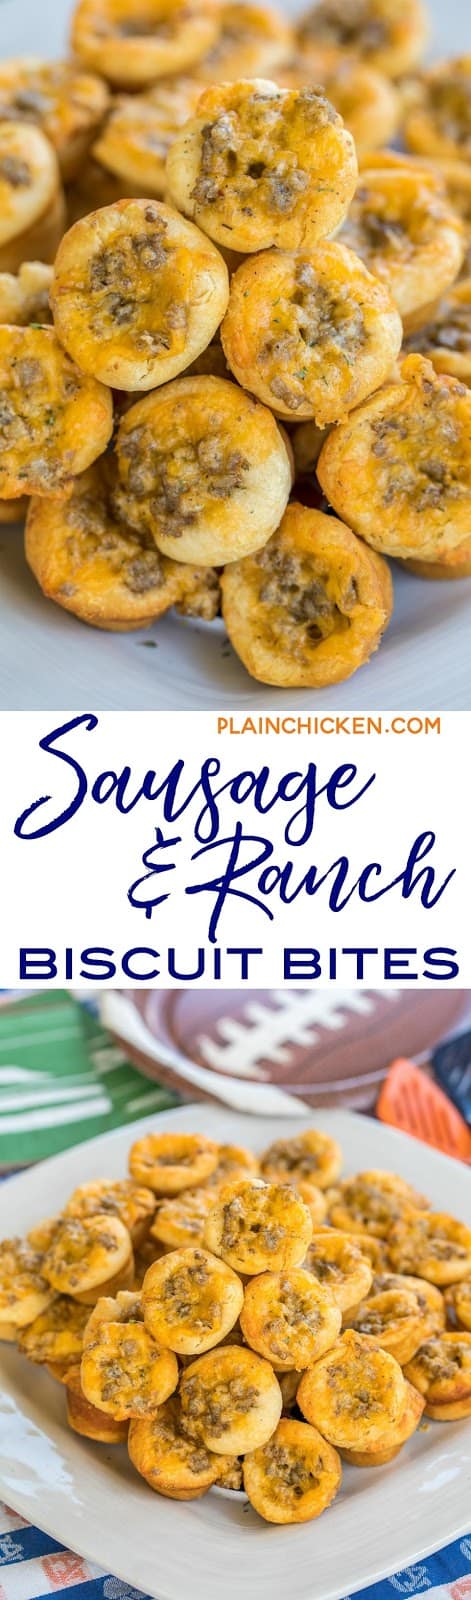 Sausage and Ranch Biscuit Bites - so GOOD! I'm totally addicted to these things! Sausage, ranch dressing, and cheddar cheese baked in biscuits. Can make the sausage mixture ahead of time and refrigerate until ready to bake. Great for tailgating, breakfast and parties! Everyone loves this recipe! #tailgating #tailgatingrecipe #appetizersforacrowd #appetizerrecipe #sausagerecipe #breakfastrecipe #breakfast #partyfood #appetizers #tailgating #ranchdressing